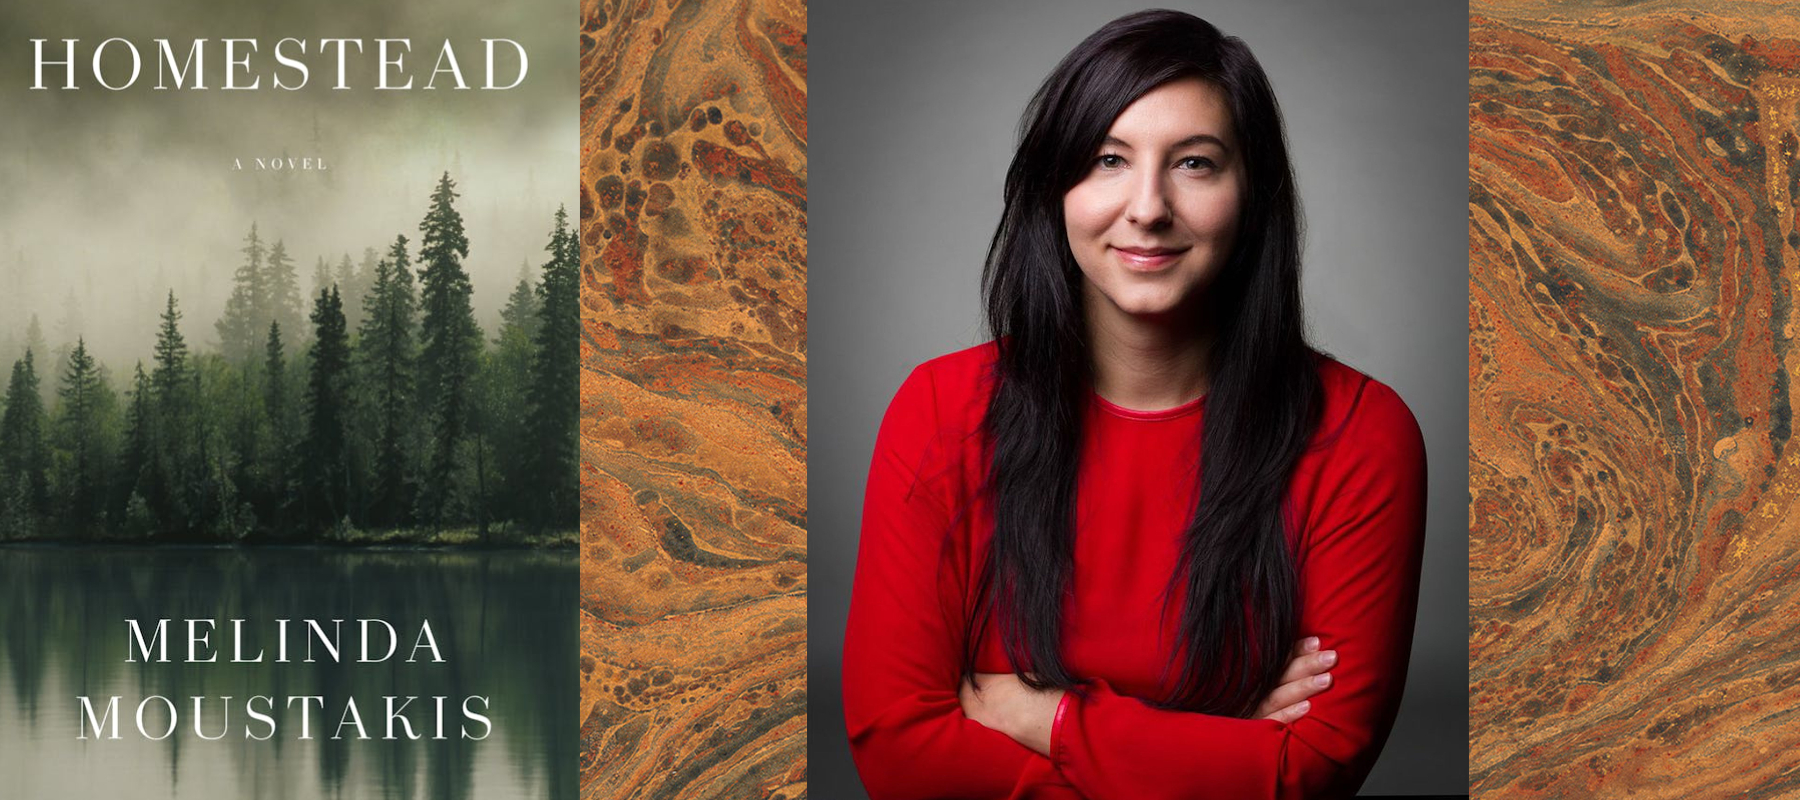 WSU’s 2023 Distinguished Visiting Writer Melinda Moustakis, right, will read from her novel, "Homestead," shown at left.